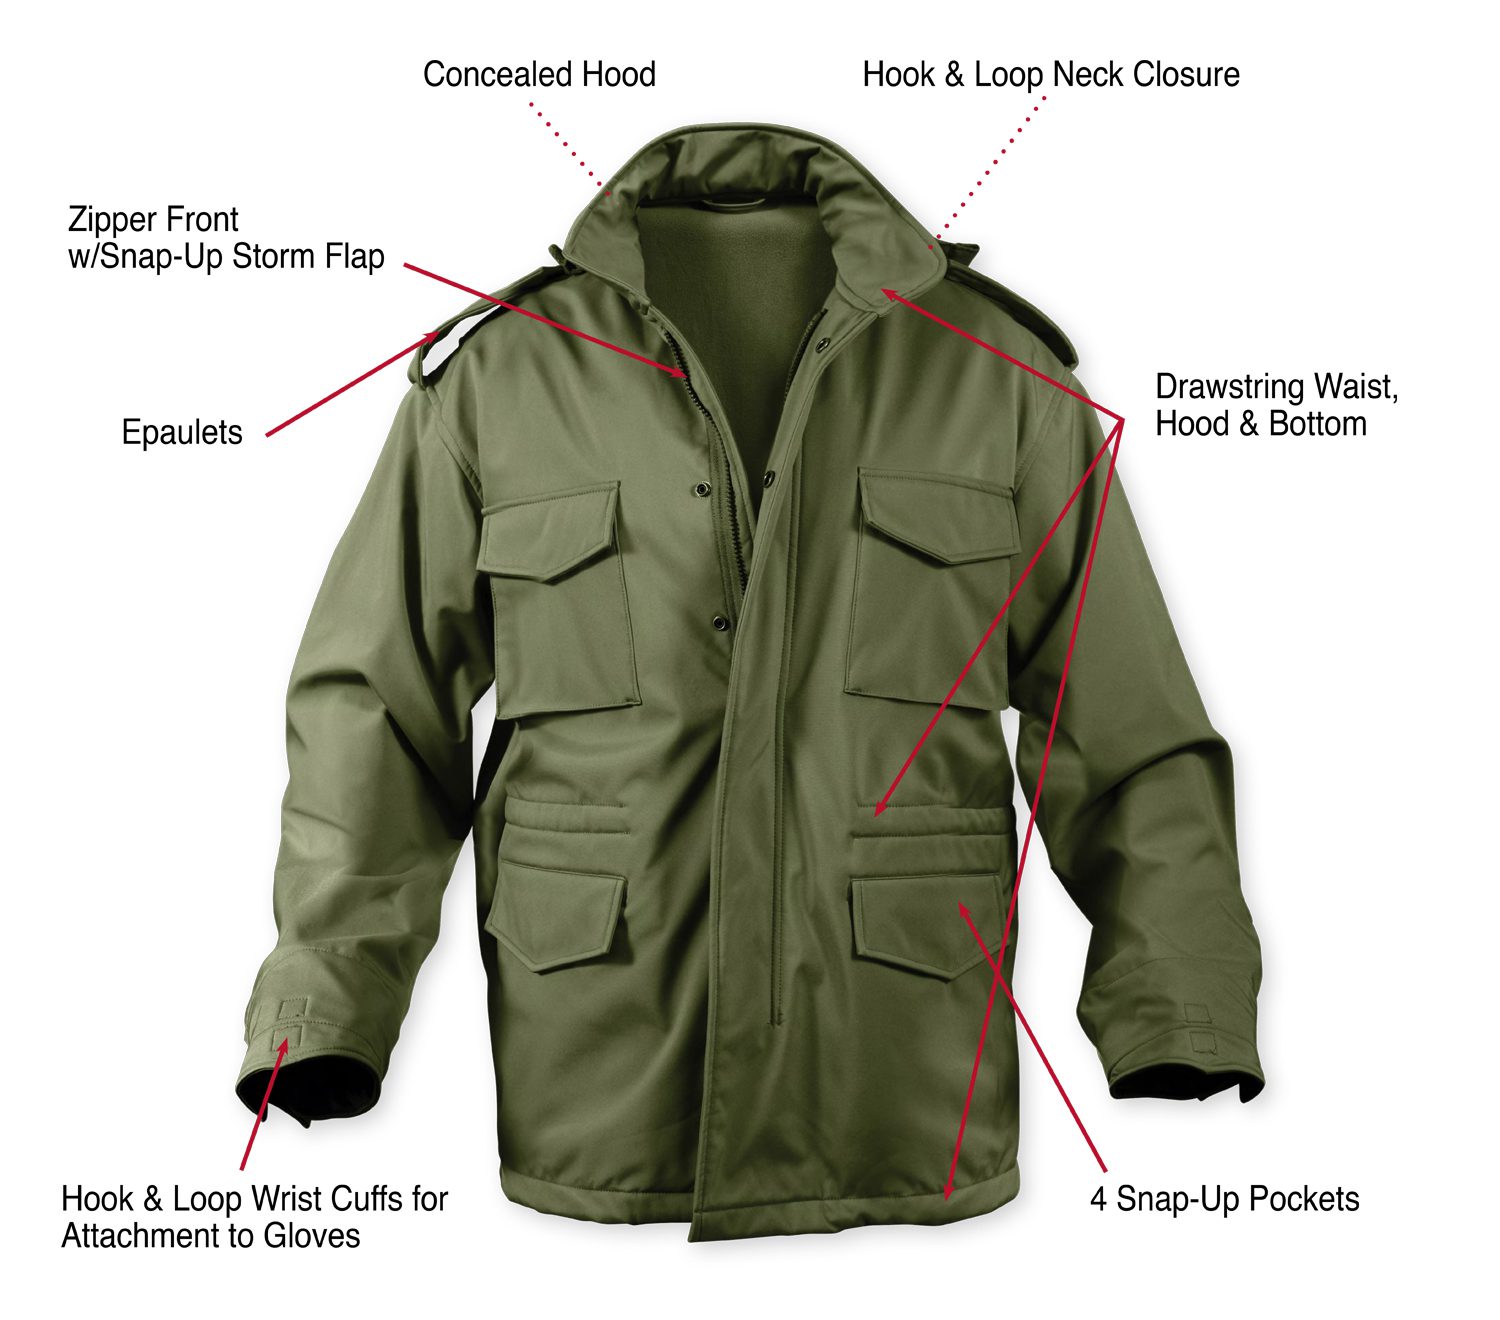 Rothco Softshell Tactical M-65 Field Jacket Coyote Brown 5246 - Softshell Jackets